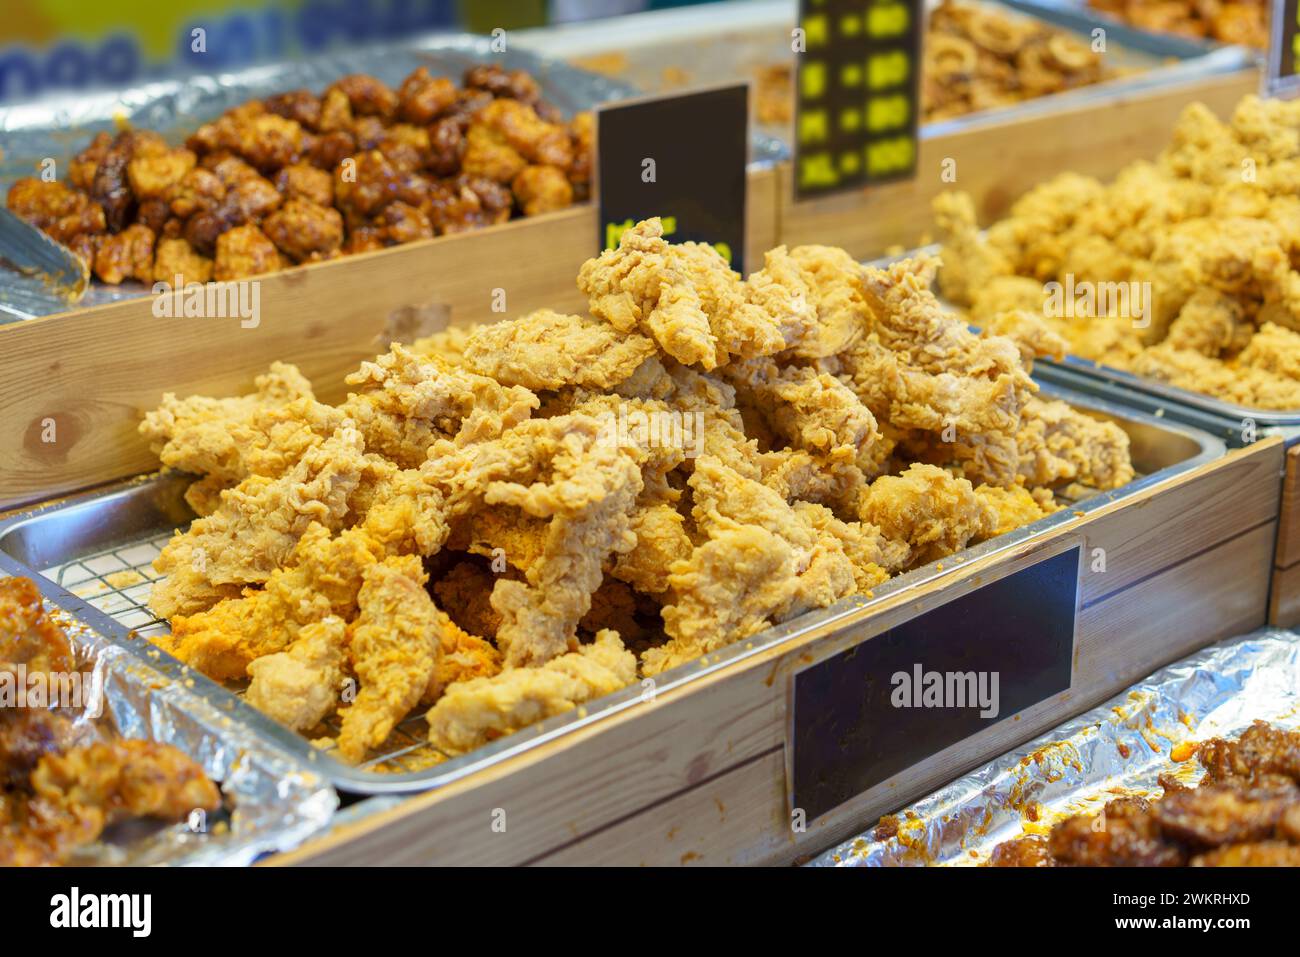 Trays filled with crispy golden fried chicken pieces, ready to be served to customers at a busy food market Stock Photo